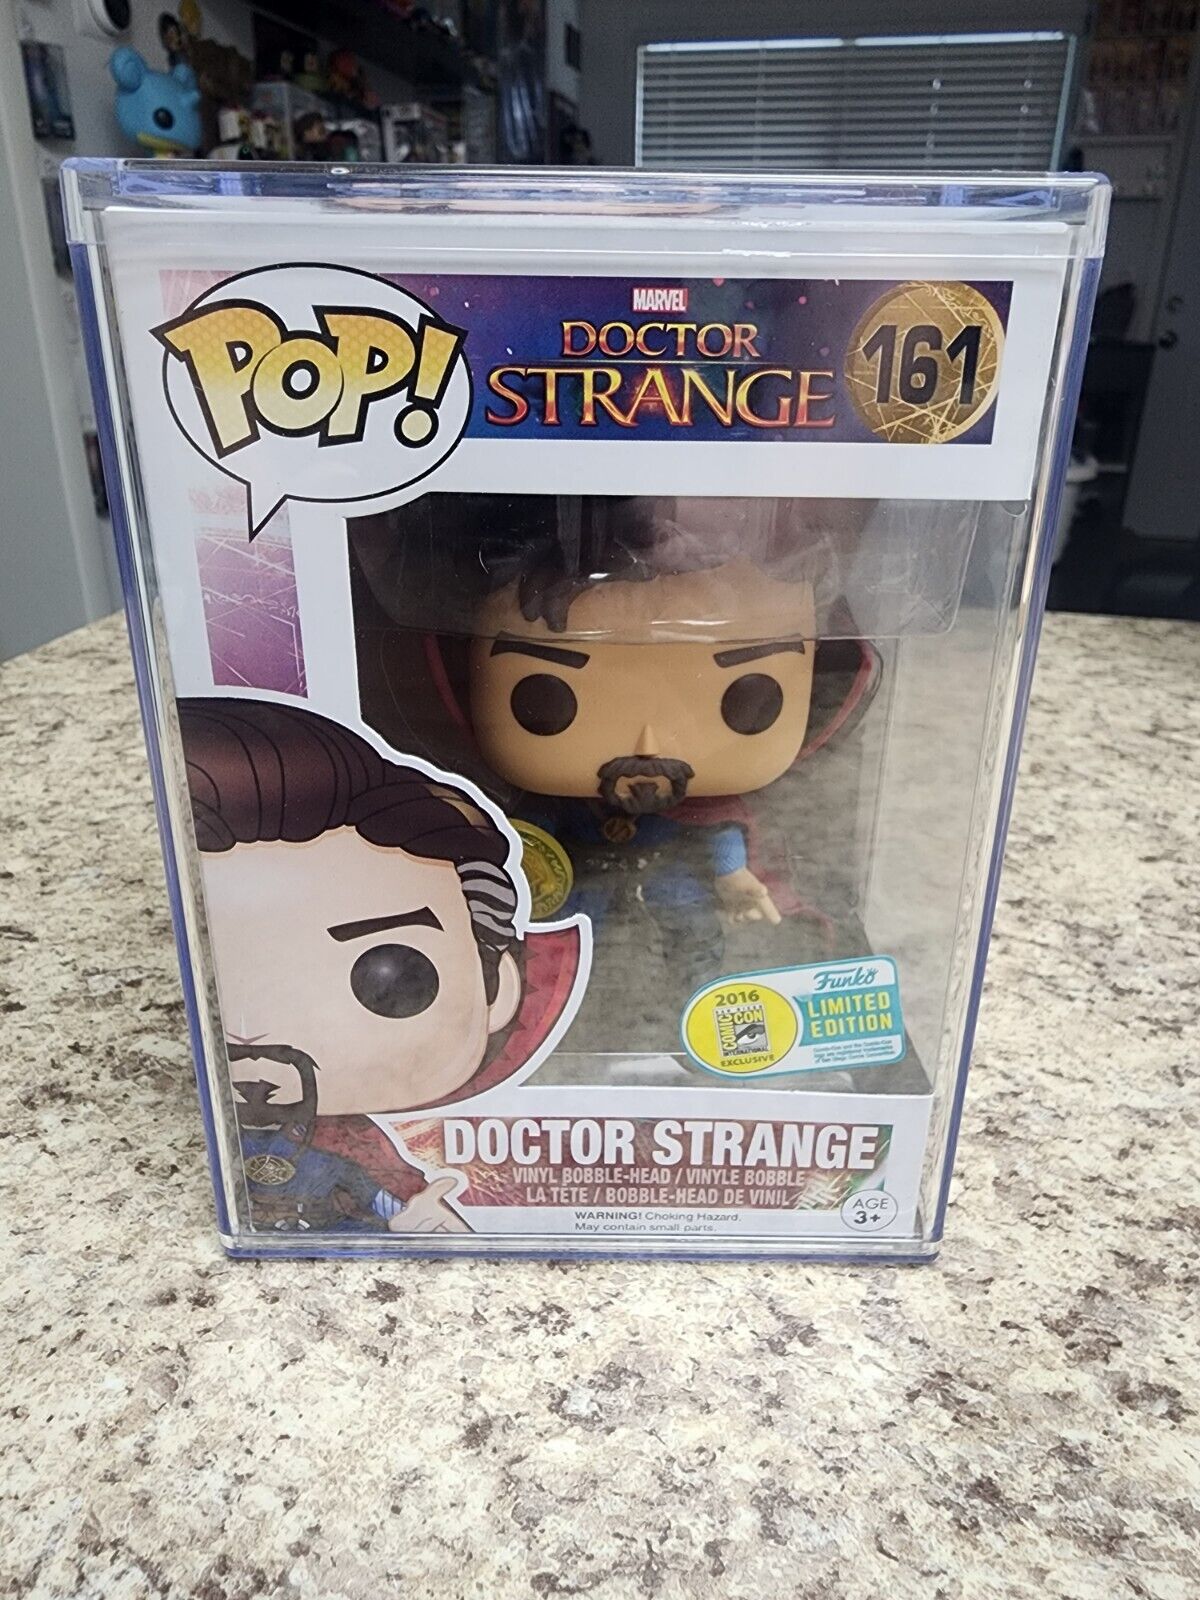 FUNKO POP DOCTOR STRANGE SDCC EXCLUSIVE OFFICIAL MARVEL VAULTED COMIC CON #161